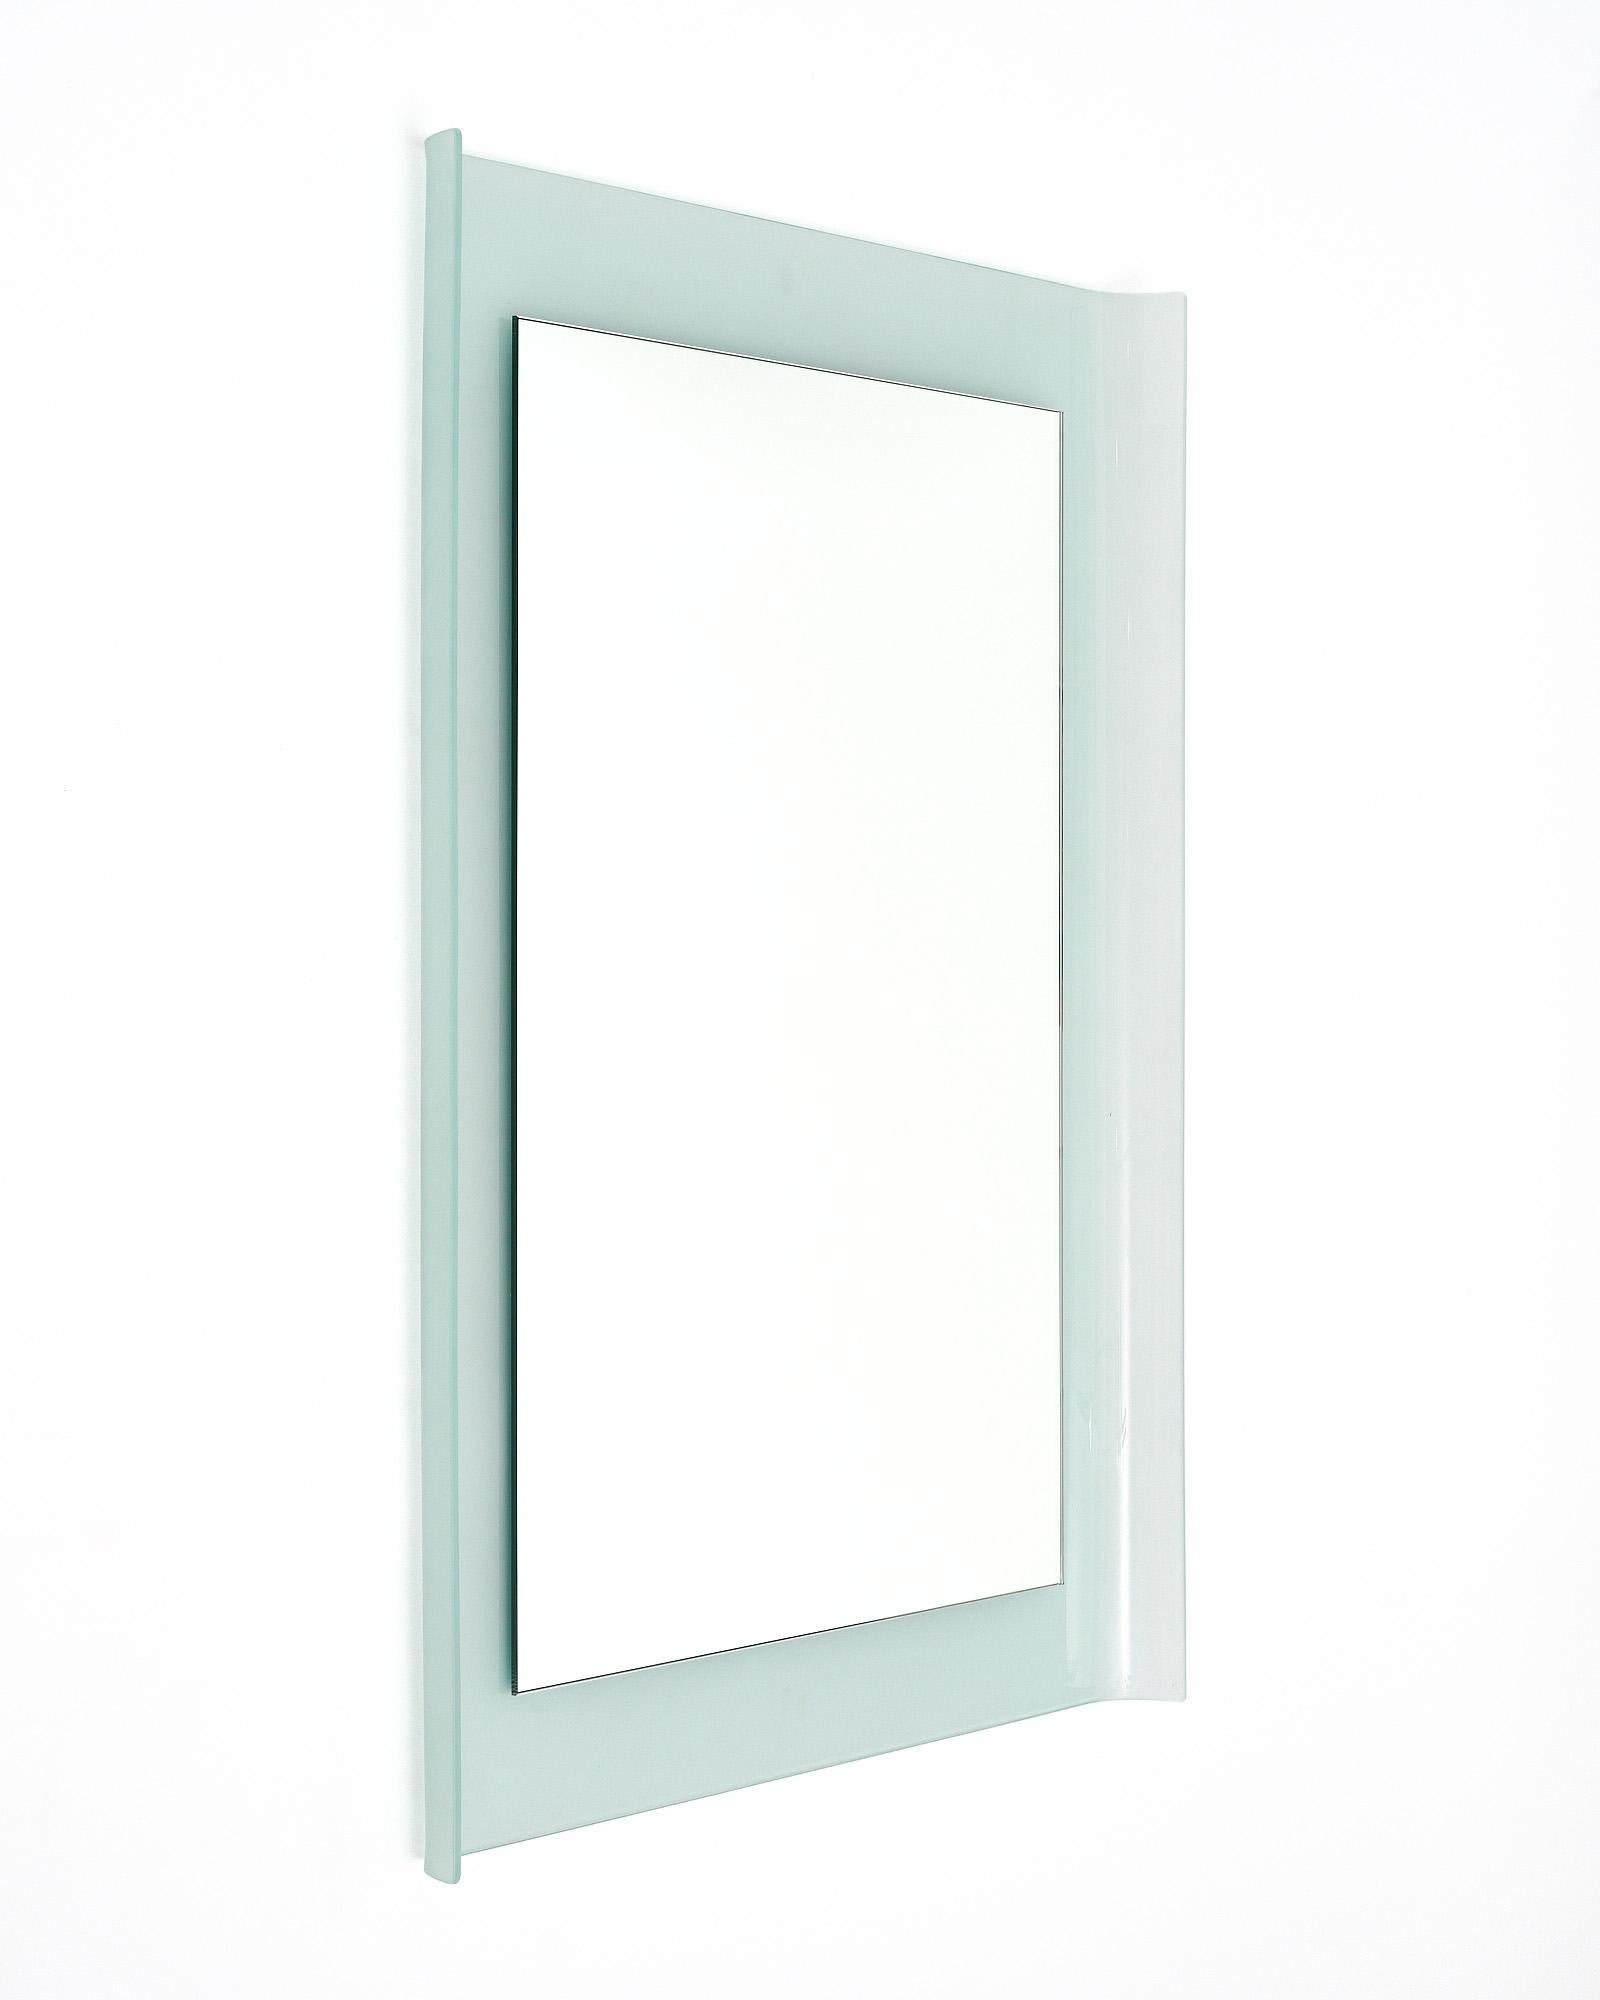 Mirror from Italy in the mid-century style. The rectangular mirror is positioned atop a piece of frosted aquamarine glass with curved sides. We were drawn to the lines of this unique piece.
